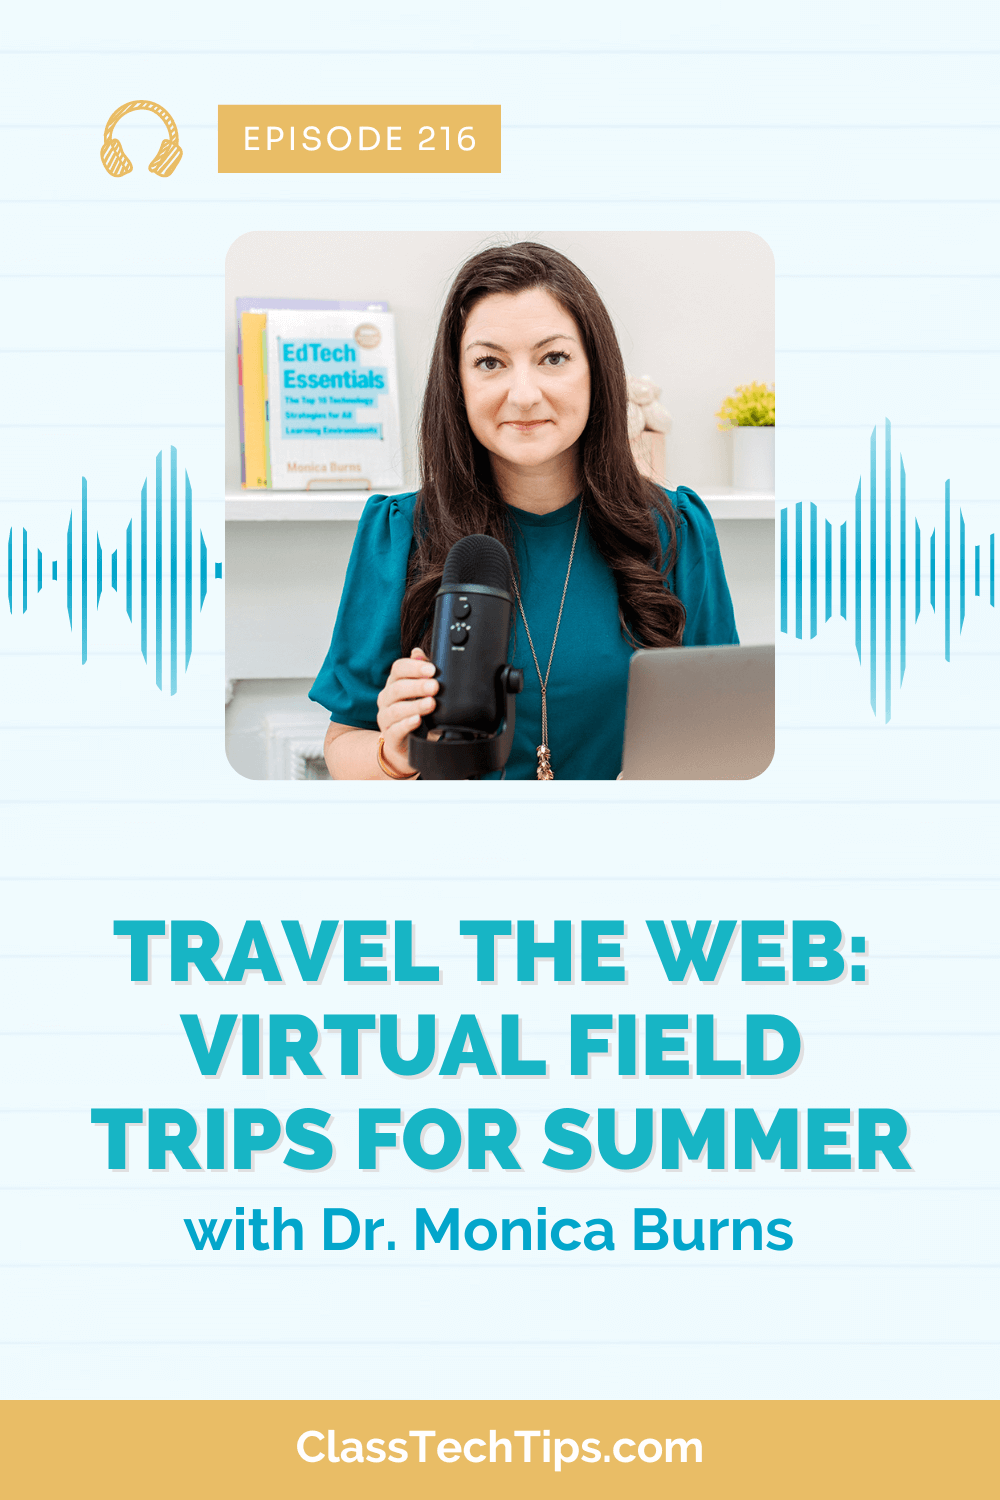 A vibrant podcast logo featuring a soundwave graphic overlay. This episode explores the exciting world of Virtual Field Trips for Summer, offering educational adventures from the comfort of your home.